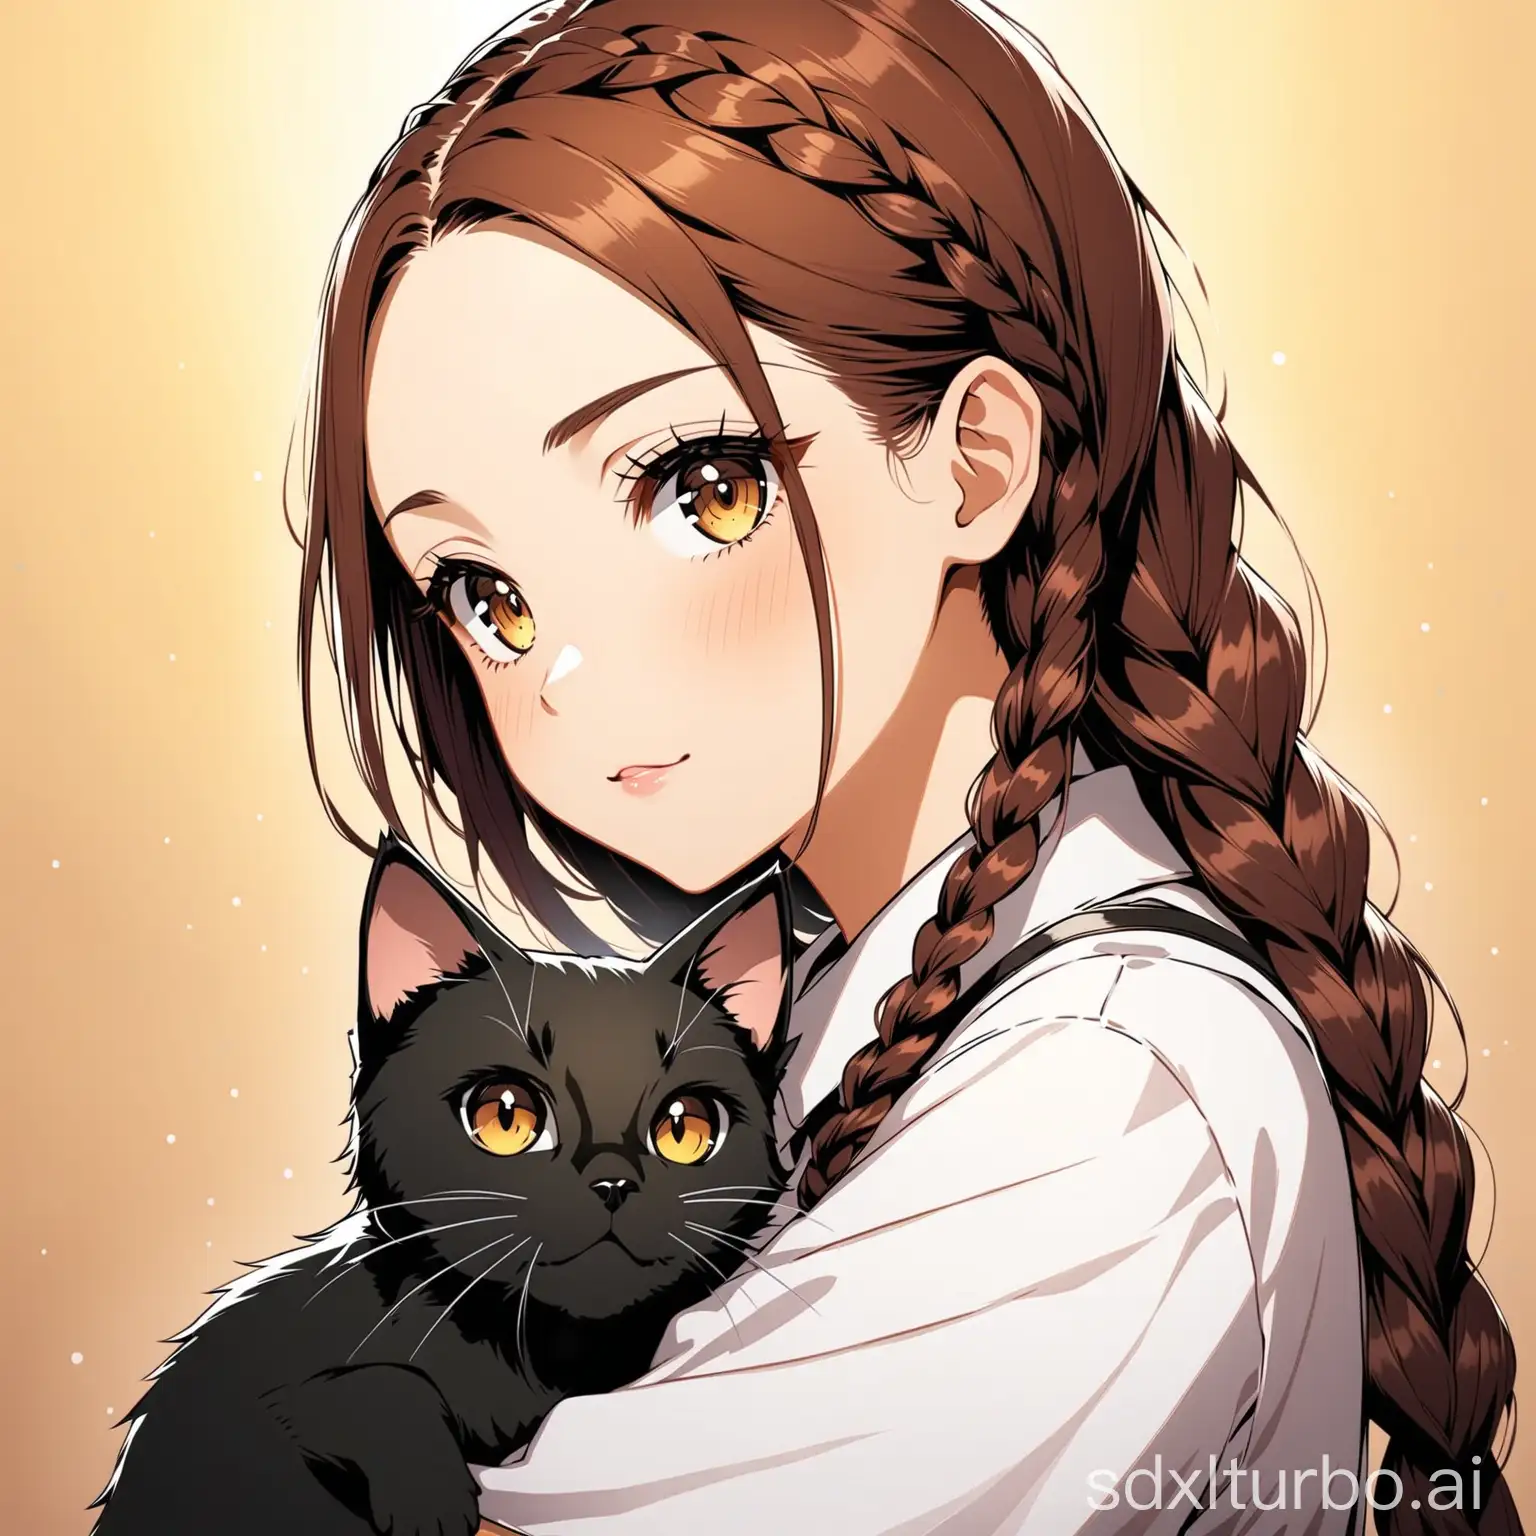 On one side, a girl with brown braids. On the other side, a black cat.